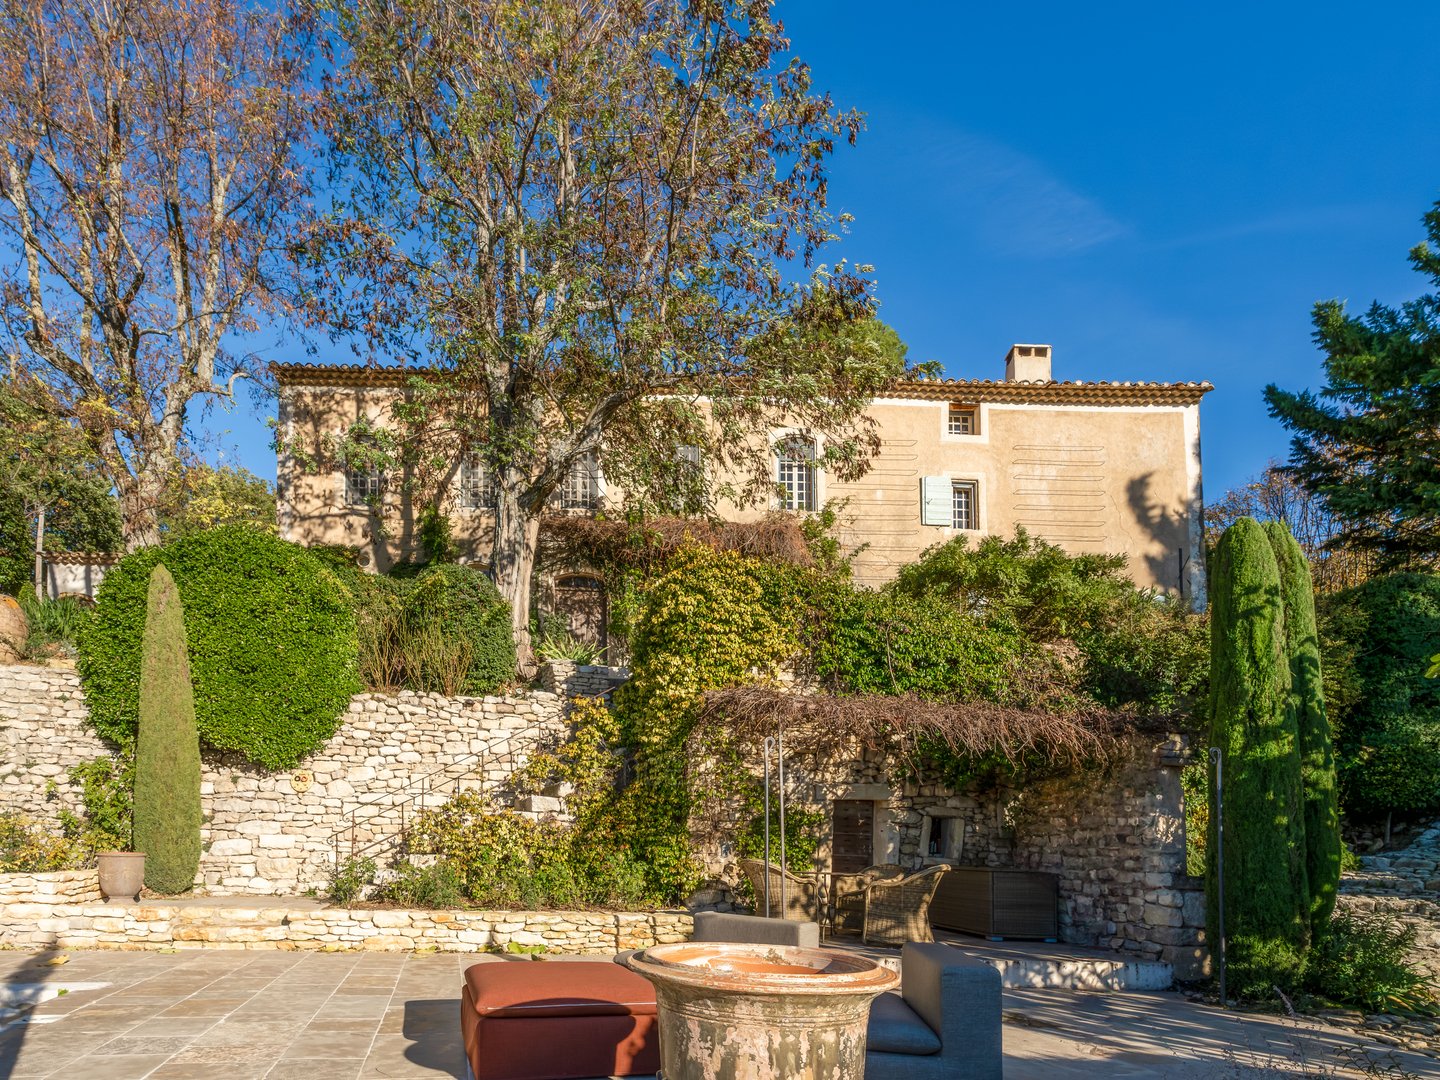 18th century Bastide with views of Luberon for sale - Bonnieux - 25